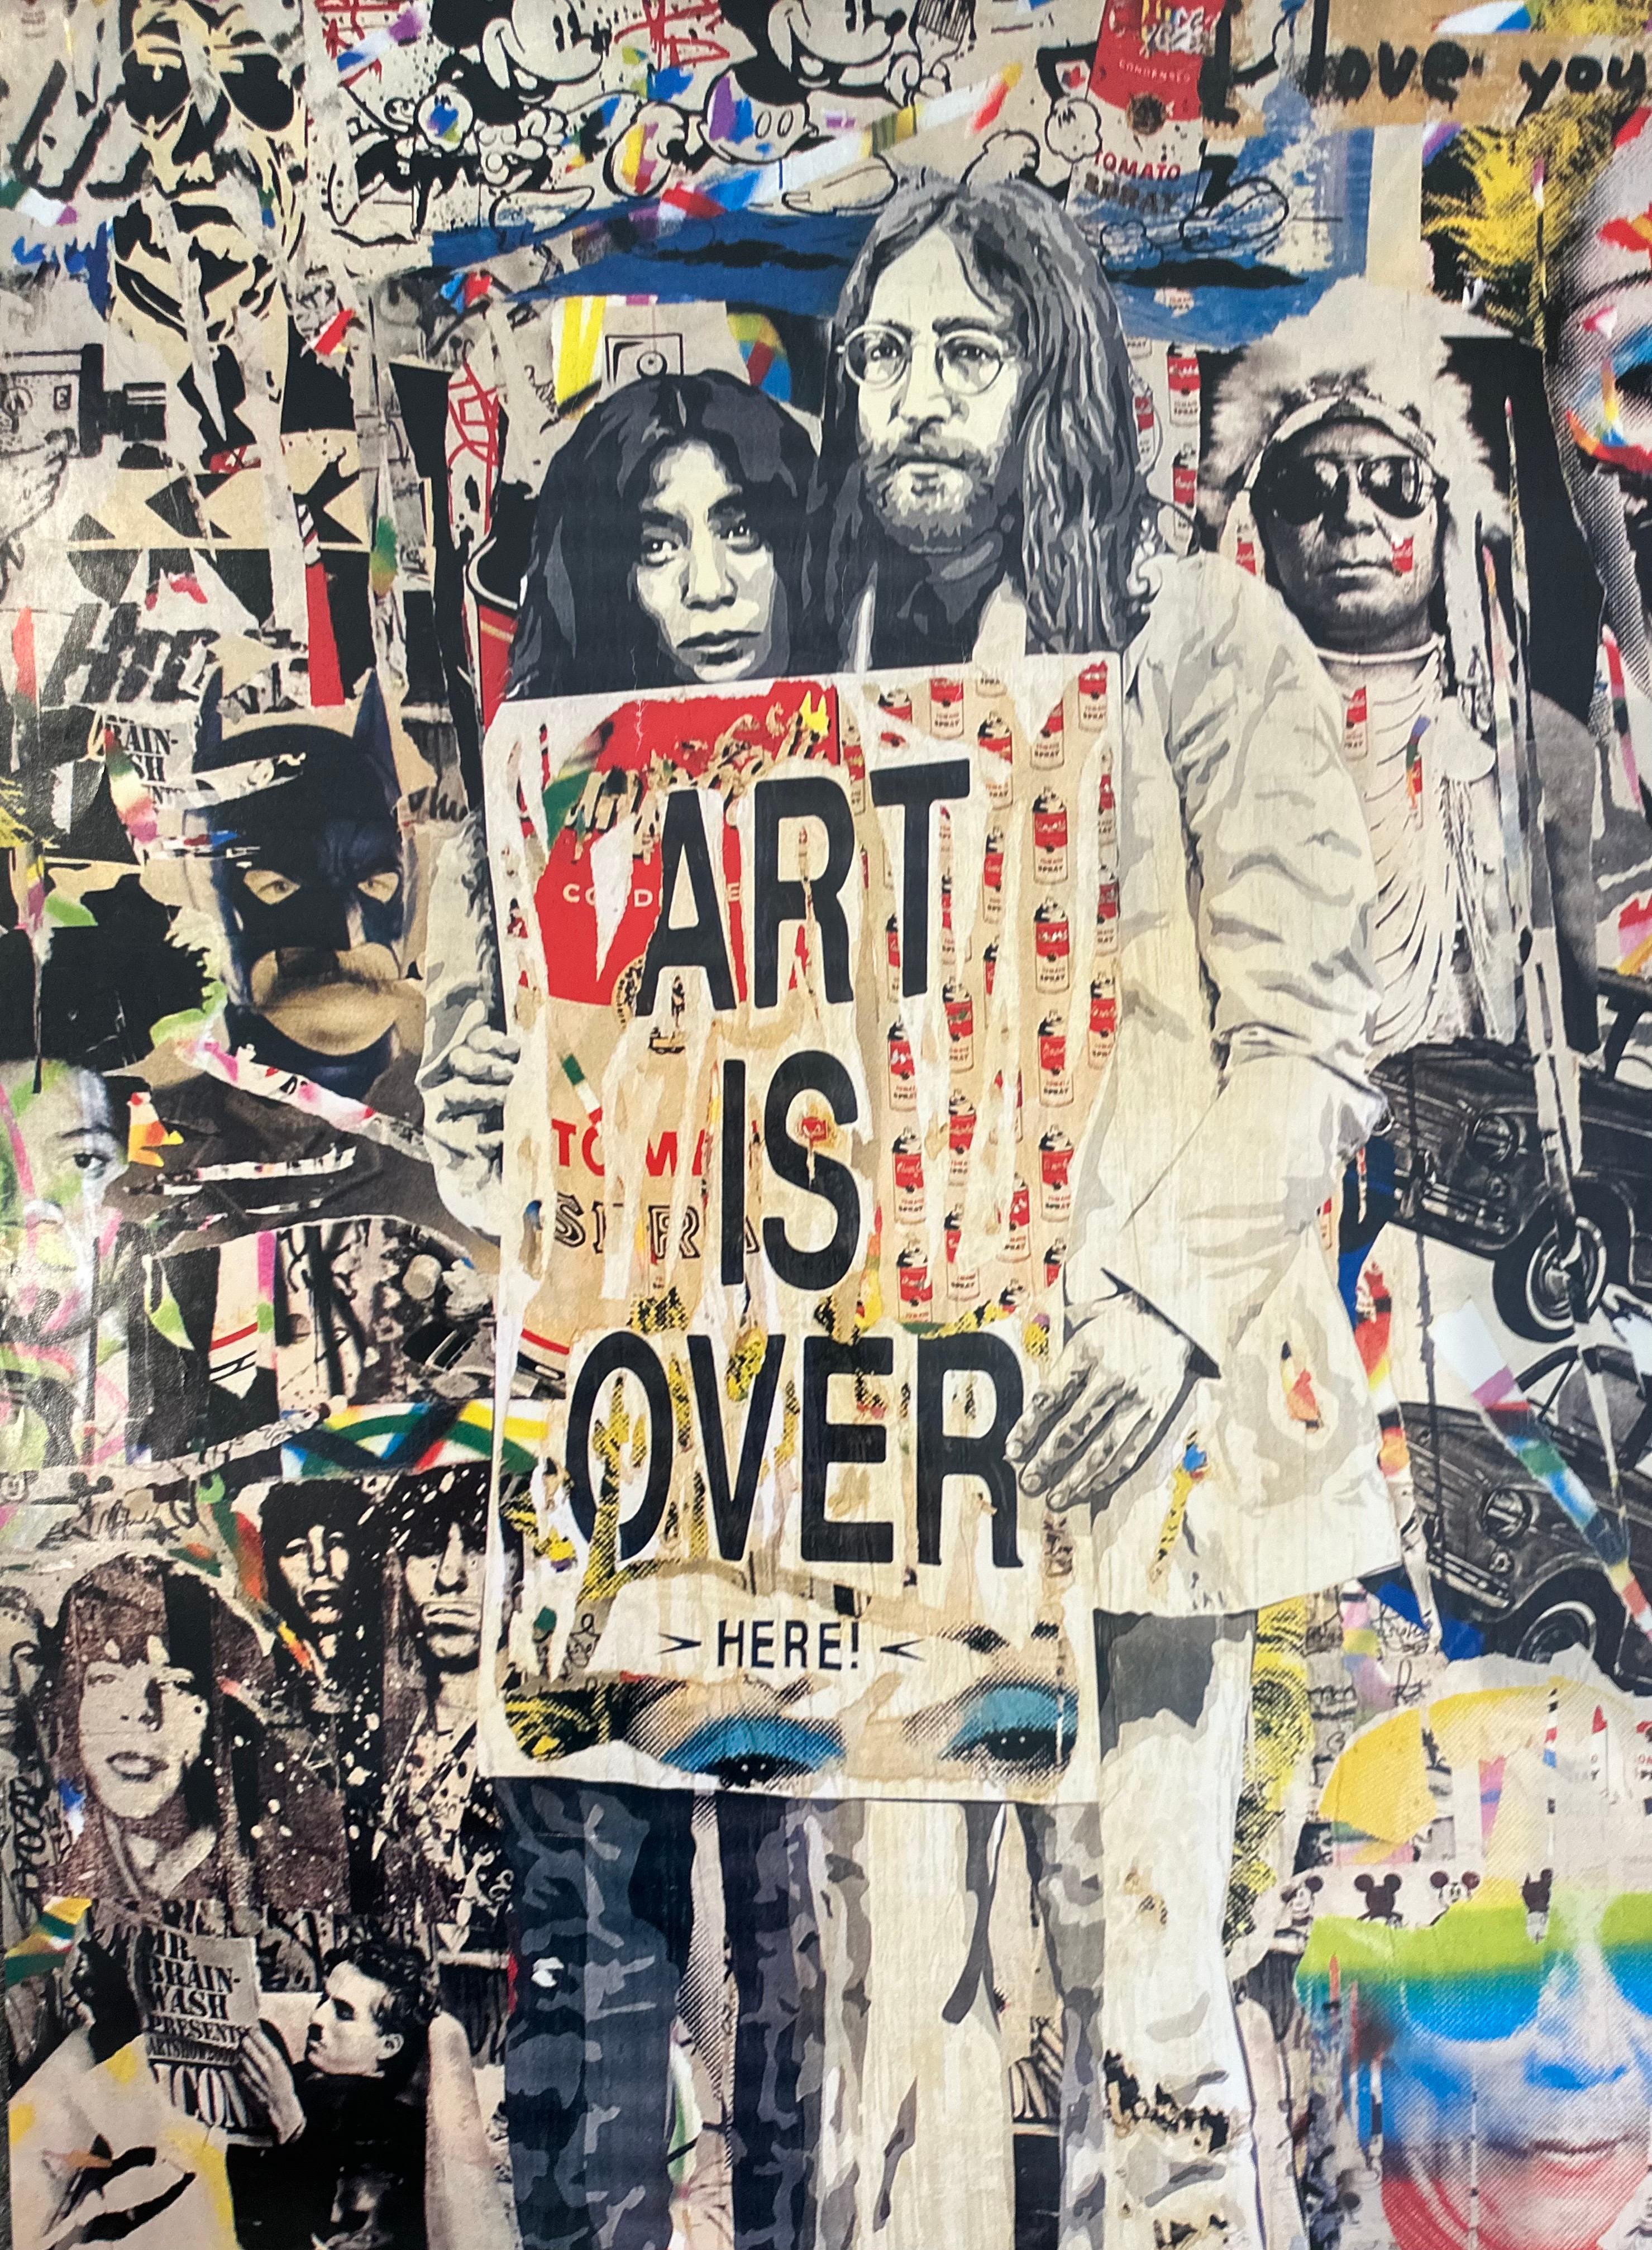 Highly collectible John Lennon & Yoko Ono lithograph poster from the legendary ICONS Exhibit by Mr. Brainwash, circa 2010. The piece, which is unframed measures 23